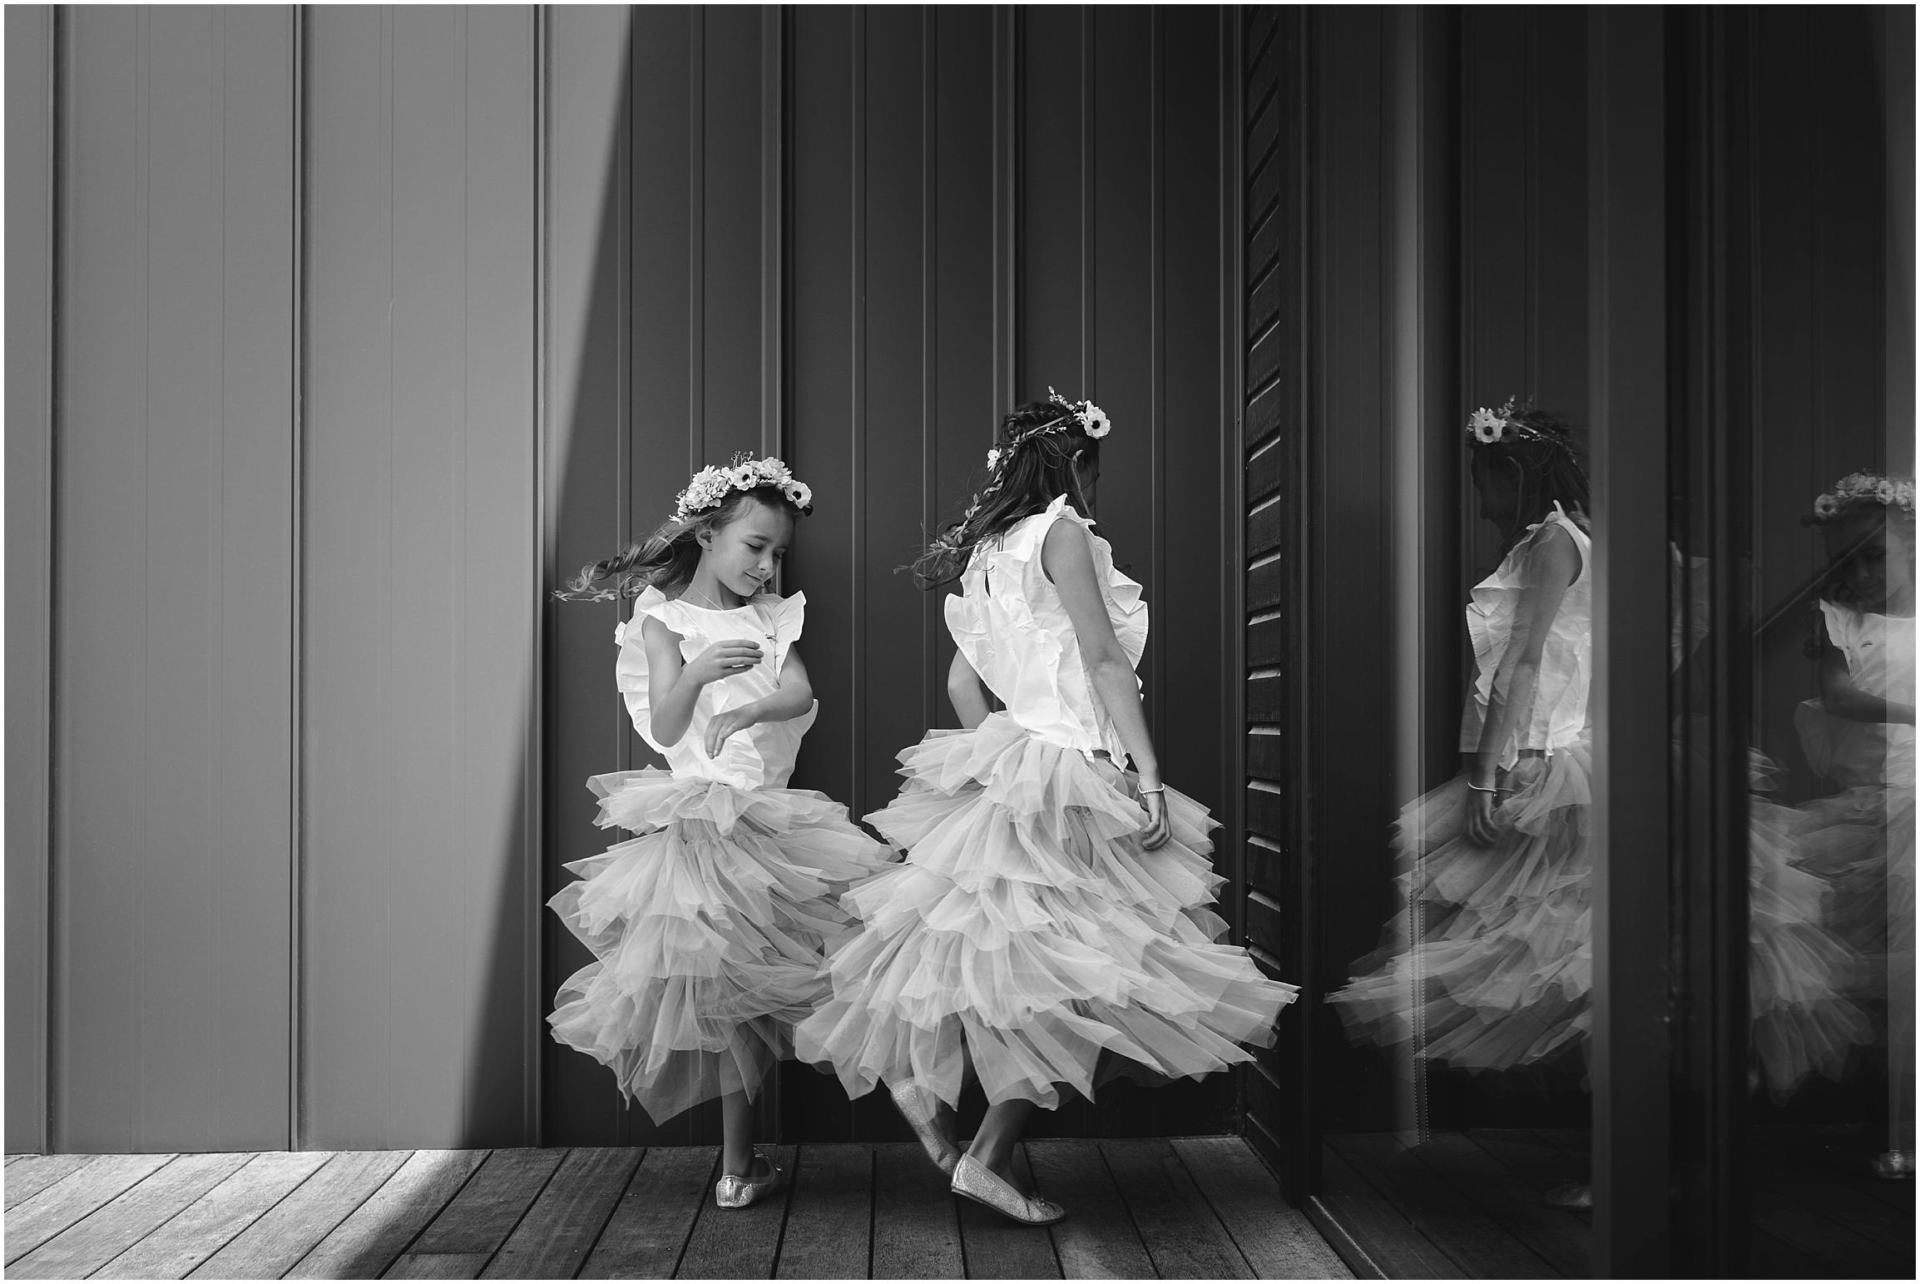 Charlotte Kiri Photography - Wedding Photography of a couple of bridesmaids wearing floral wreaths and spinning their pretty tiered skirts in the mirror in black and white, in Wanaka, New Zealand.